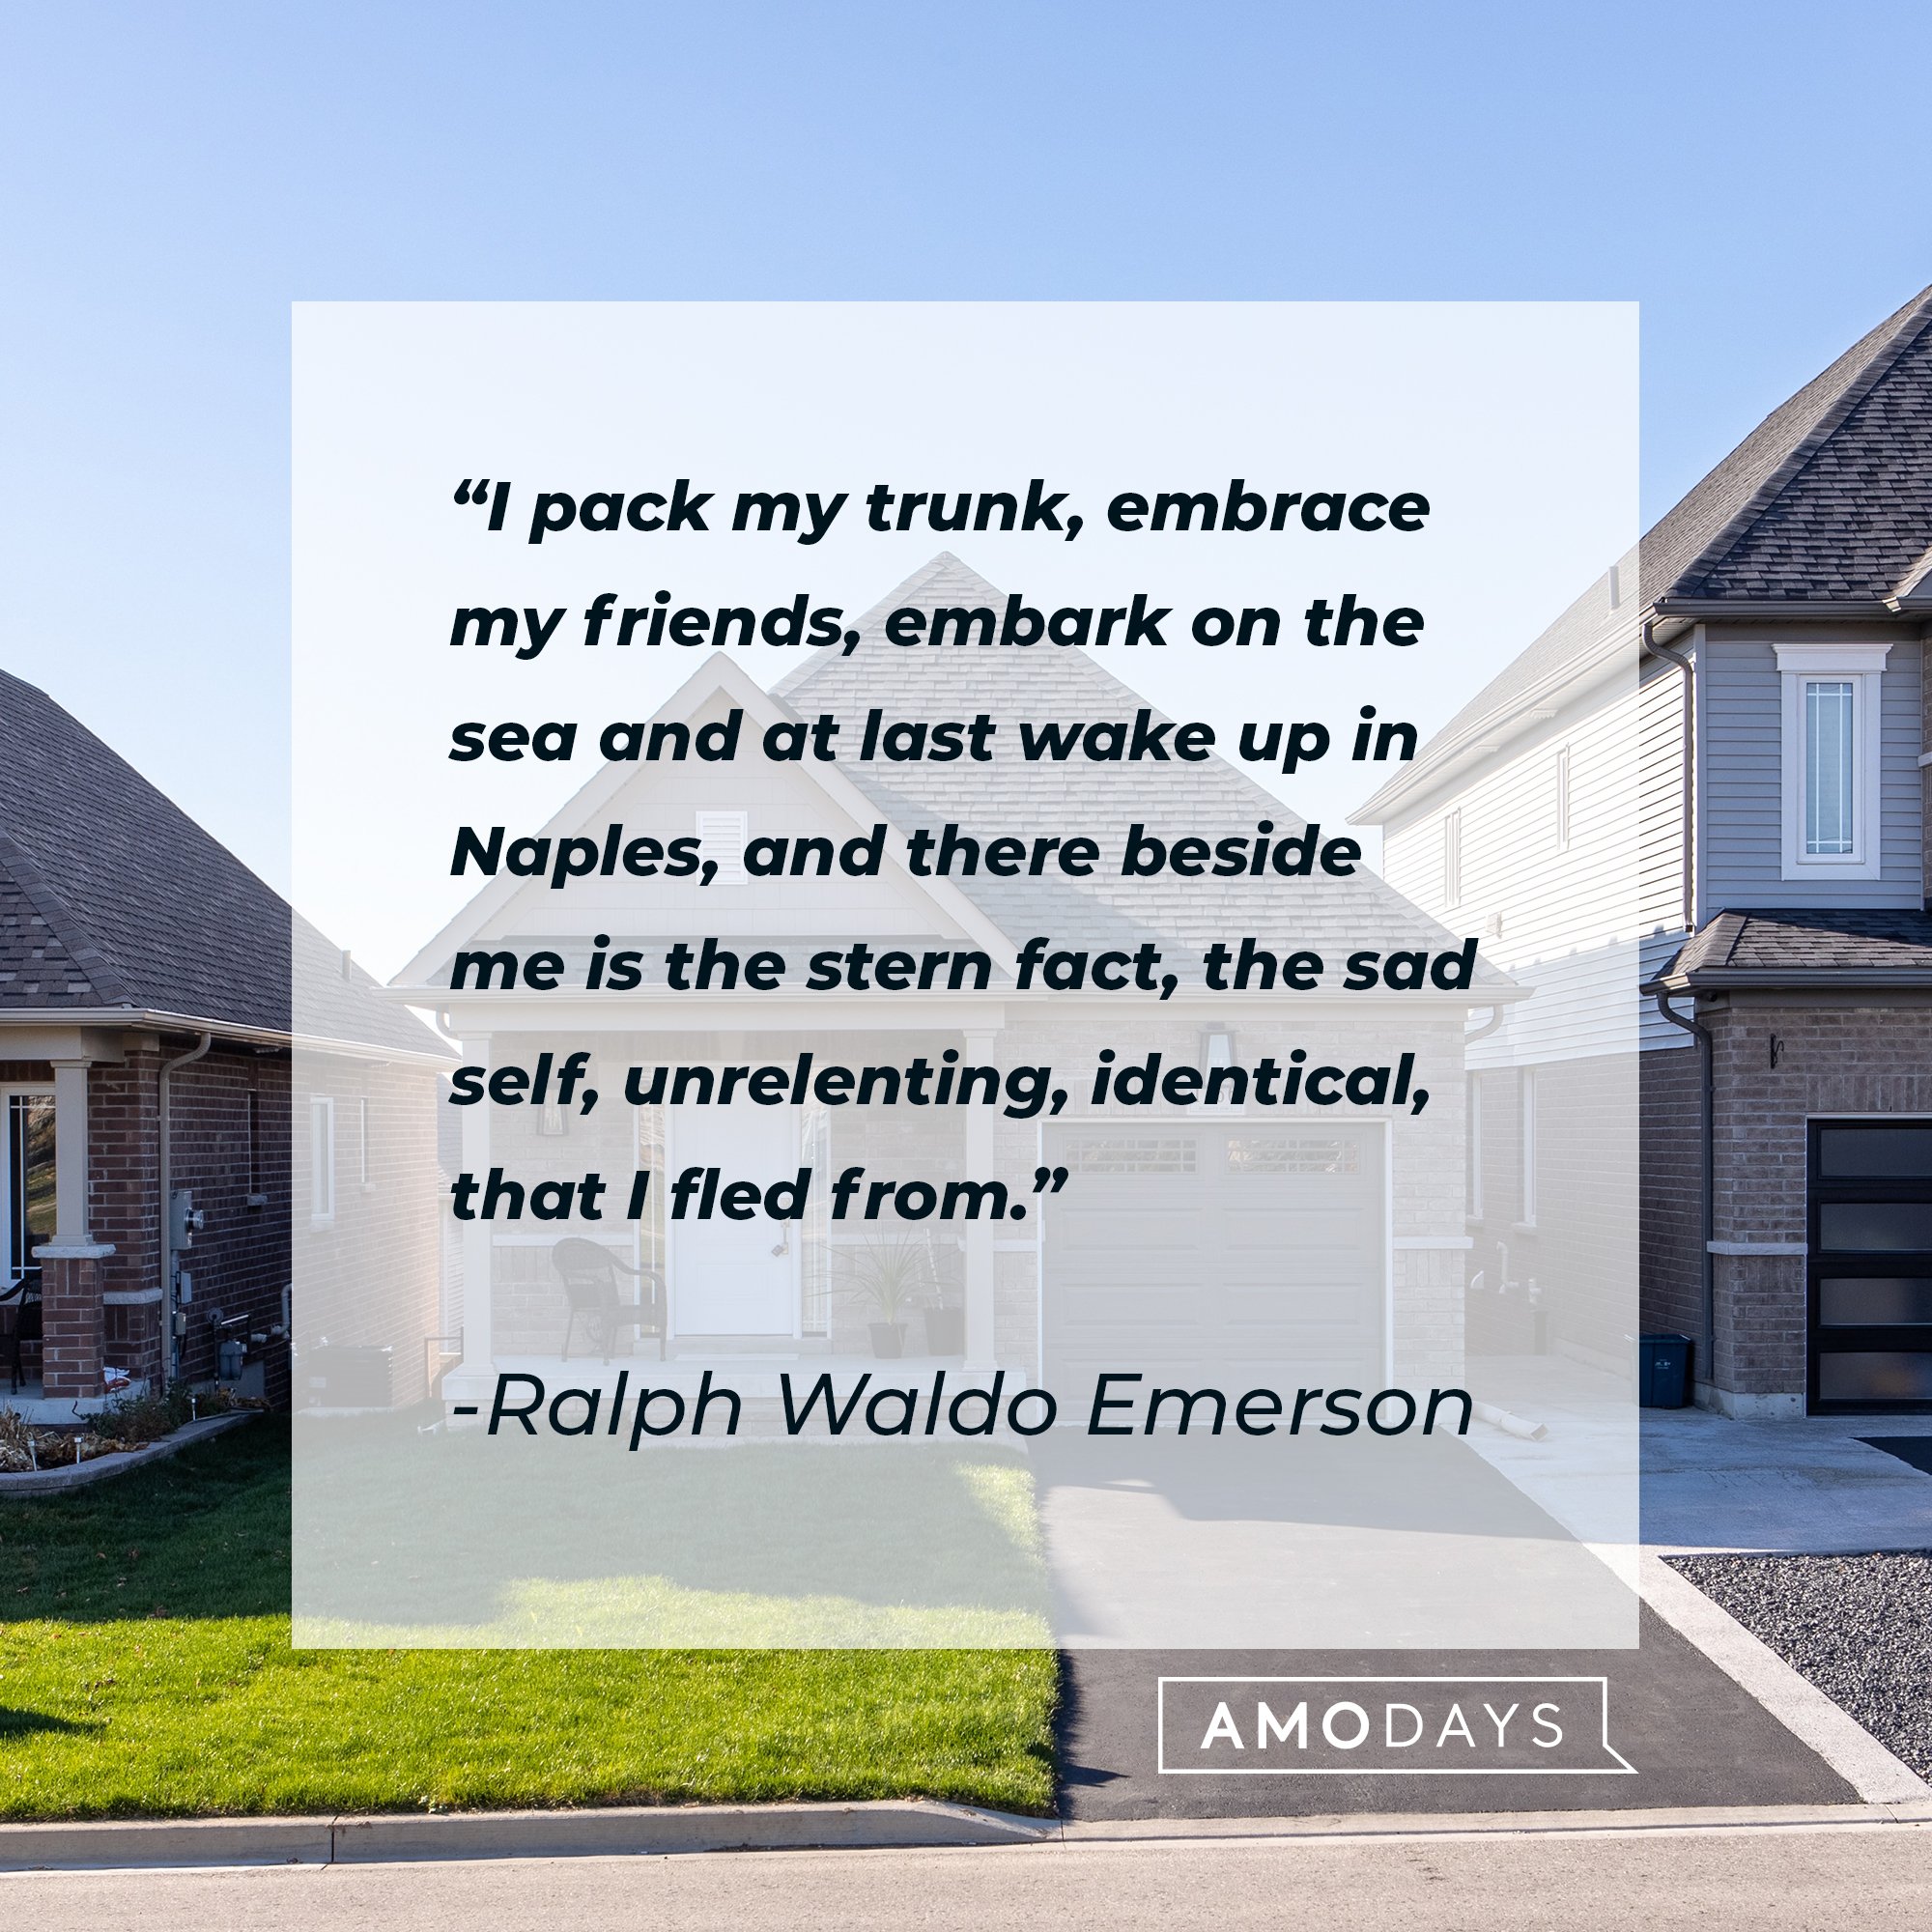 Ralph Waldo Emerson's quote: "I pack my trunk, embrace my friends, embark on the sea and at last wake up in Naples, and there beside me is the stern fact, the sad self, unrelenting, identical, that I fled from." | Image: AmoDays